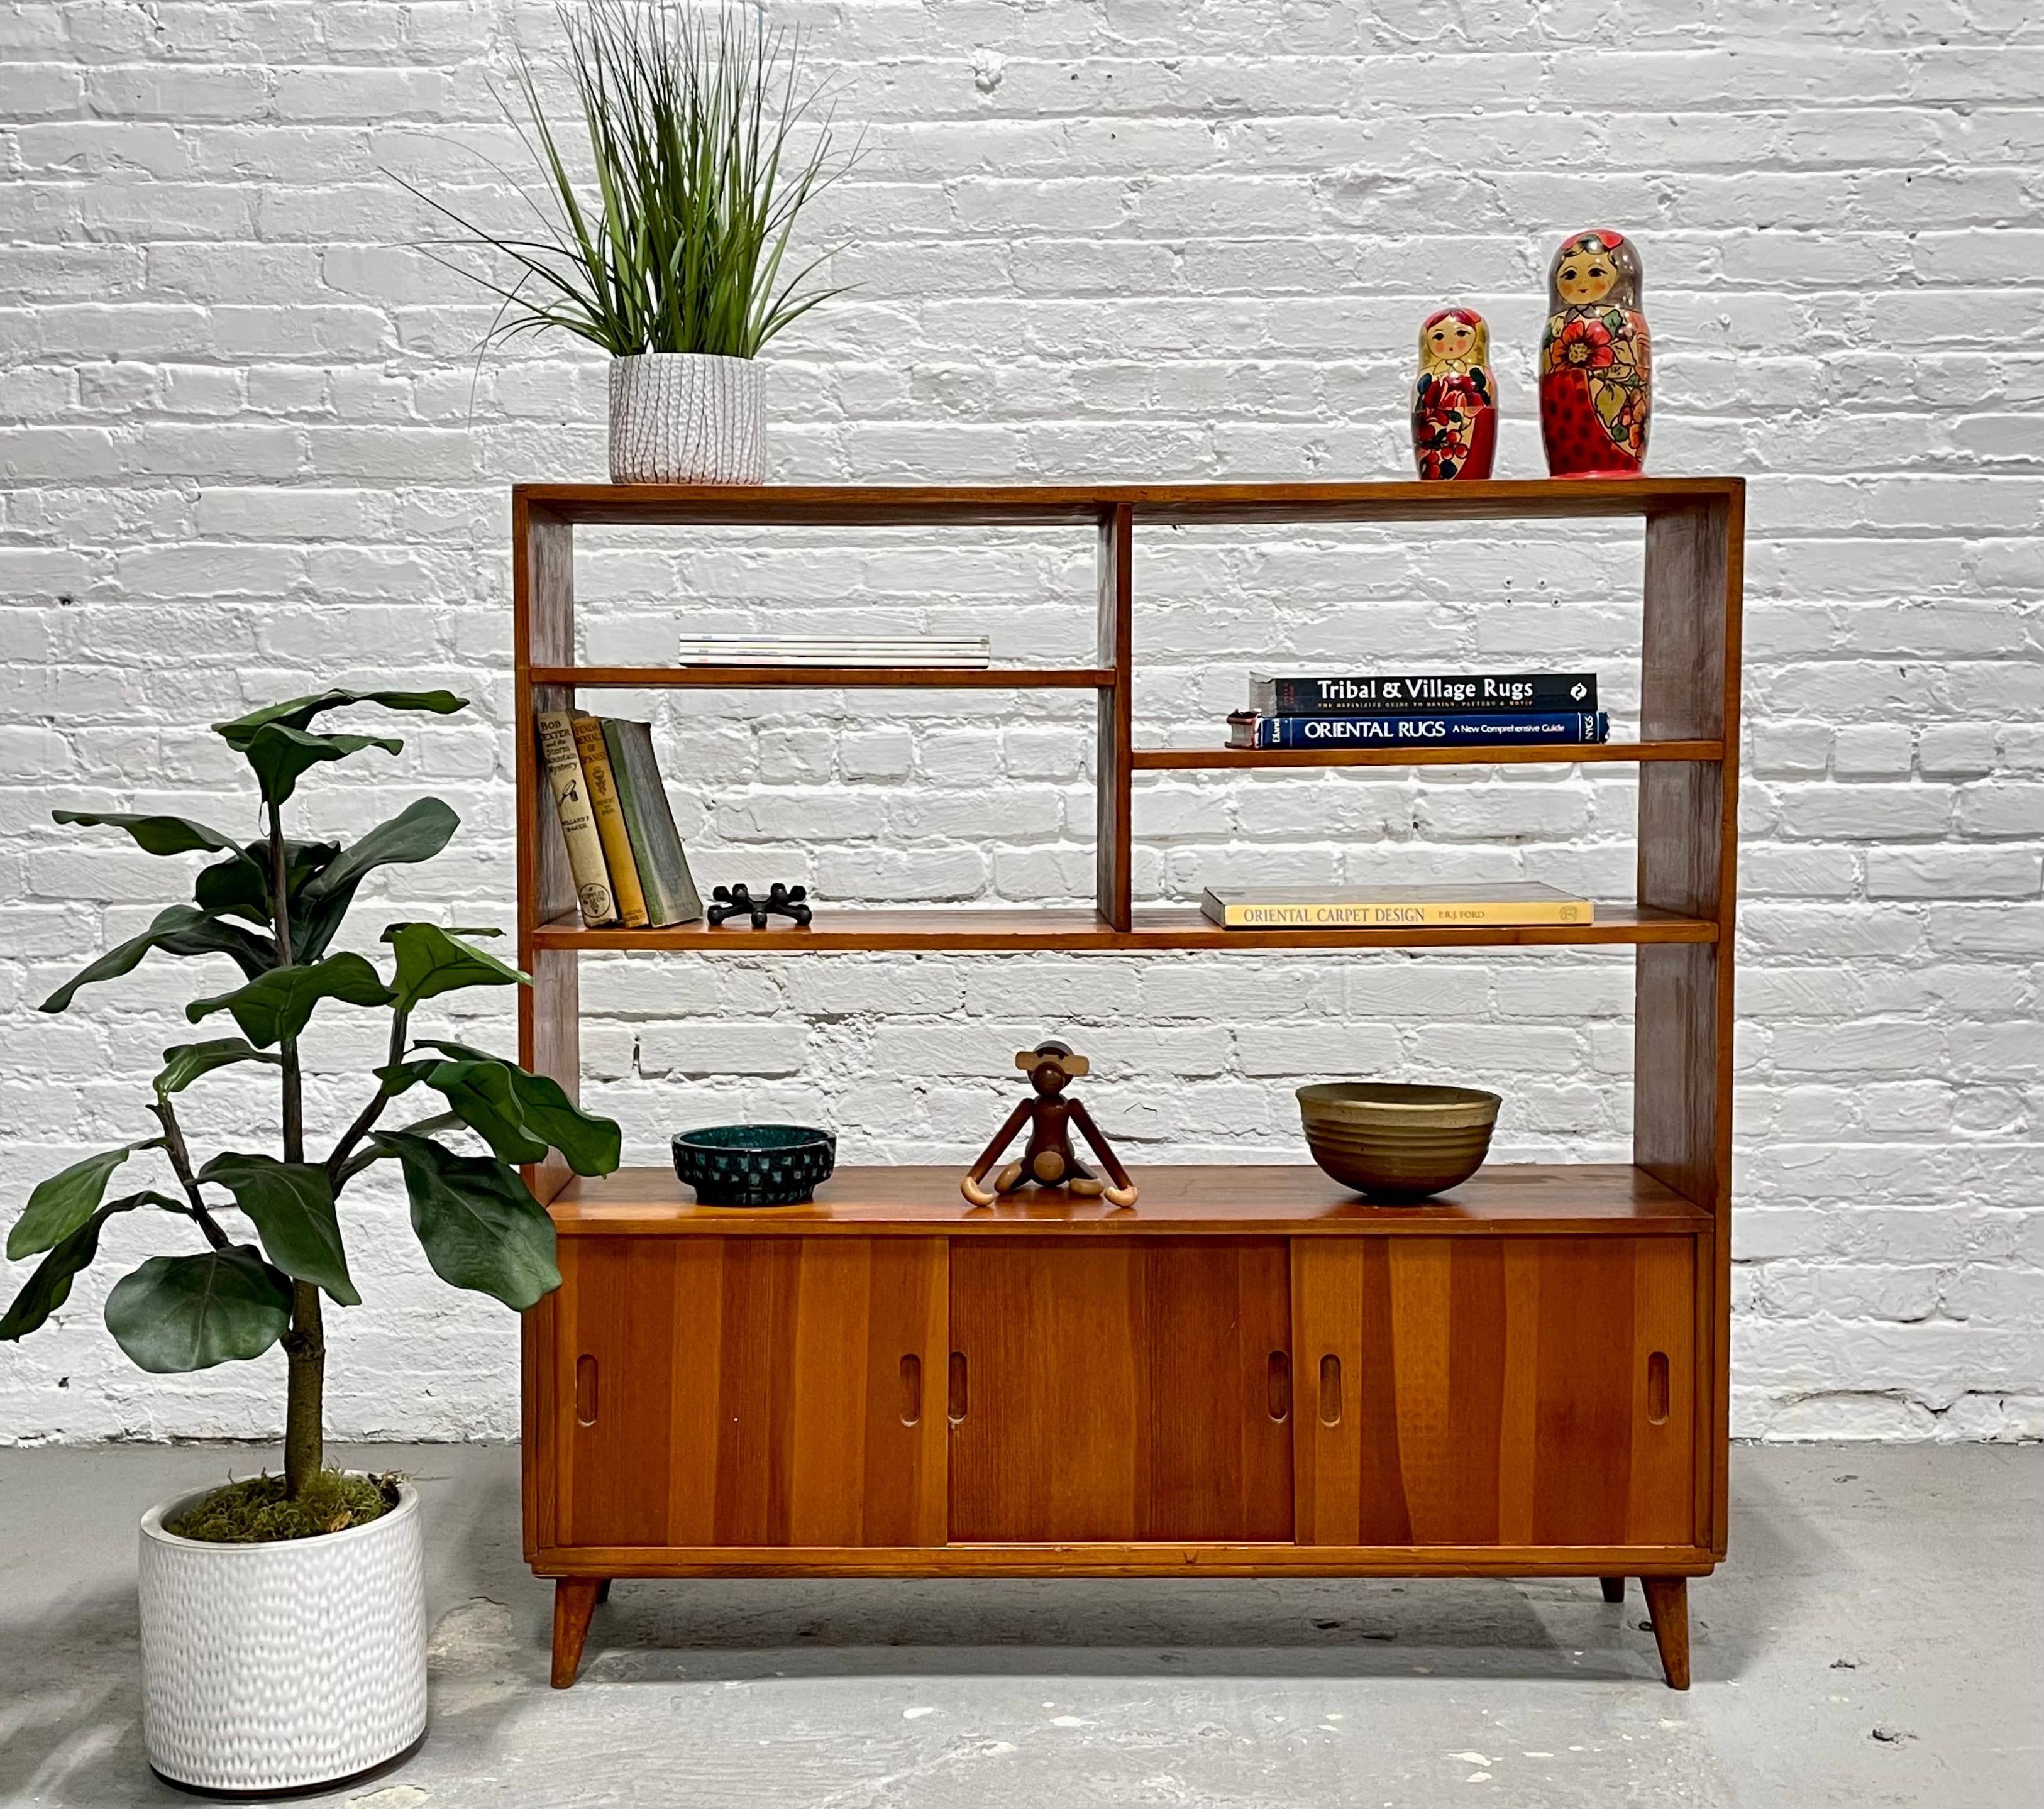 Mid-Century Modern bookcase / space divider featuring a thoughtful combination of shelving and a hidden cubby area behind three sliding doors. This handsome bookcase offers a variety of shelving to display your books or collectables and a lower